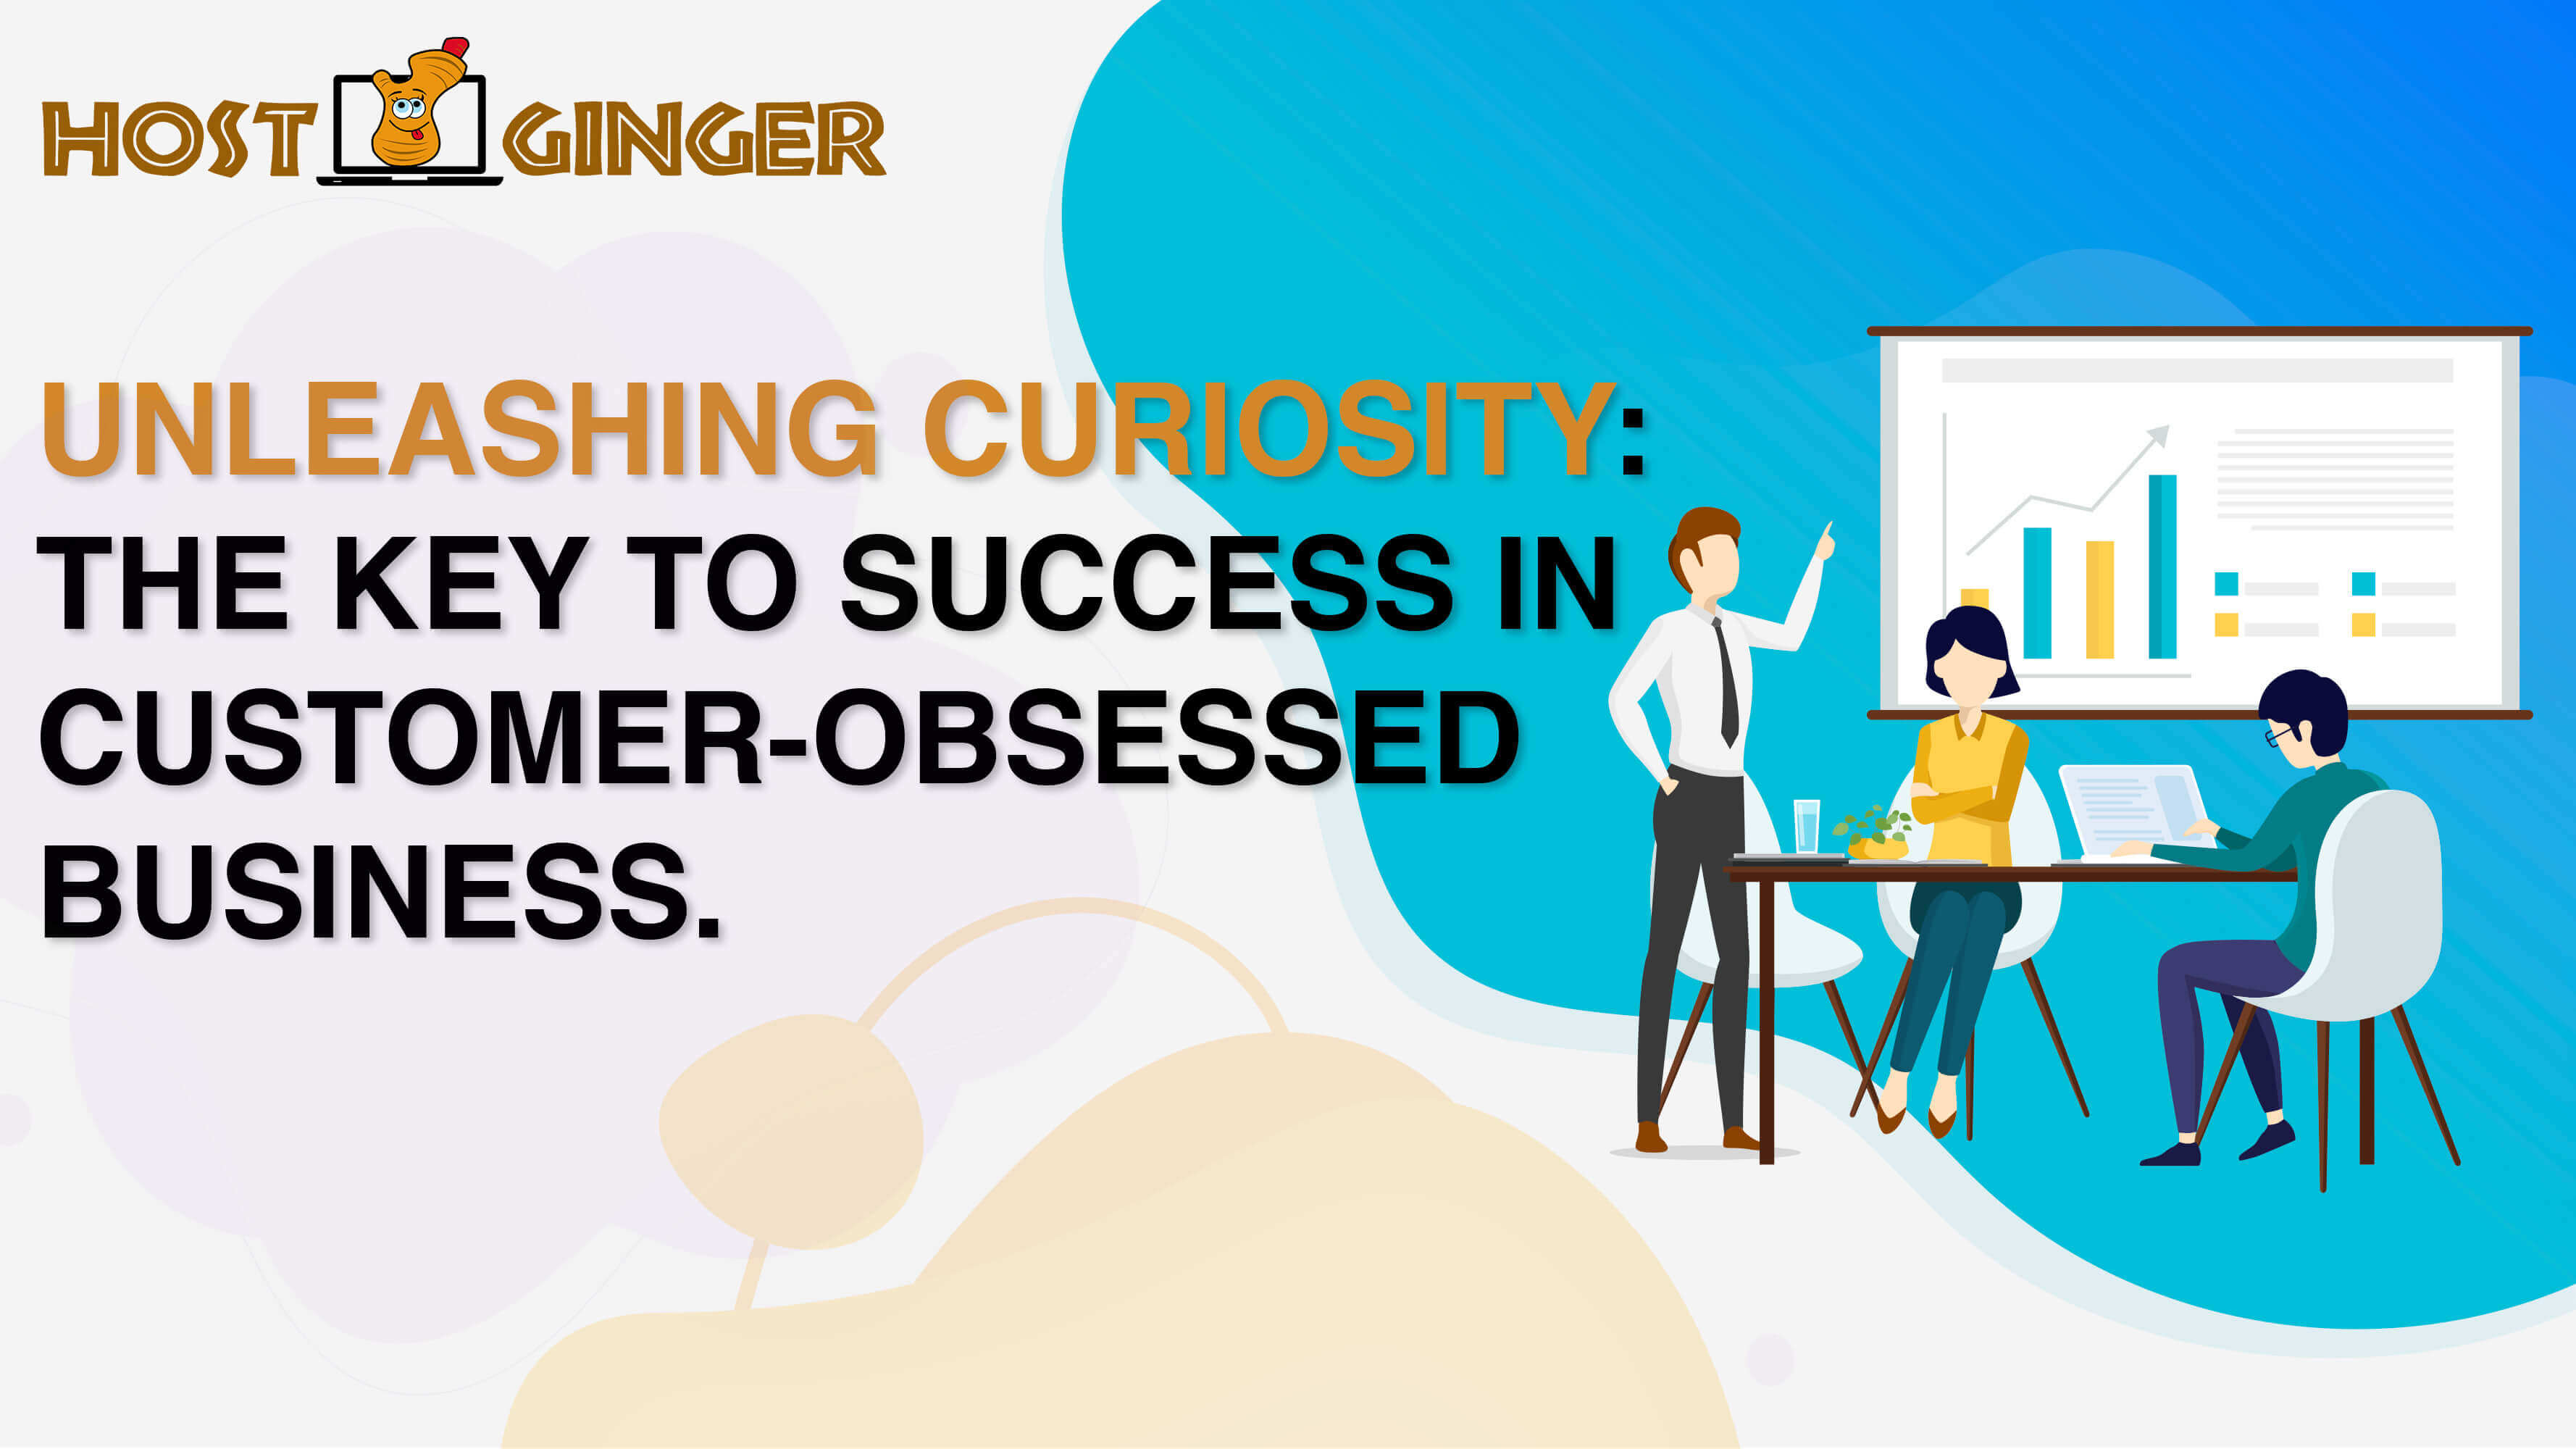 Unleashing Curiosity: The Key to Success in Customer-Obsessed Businesses